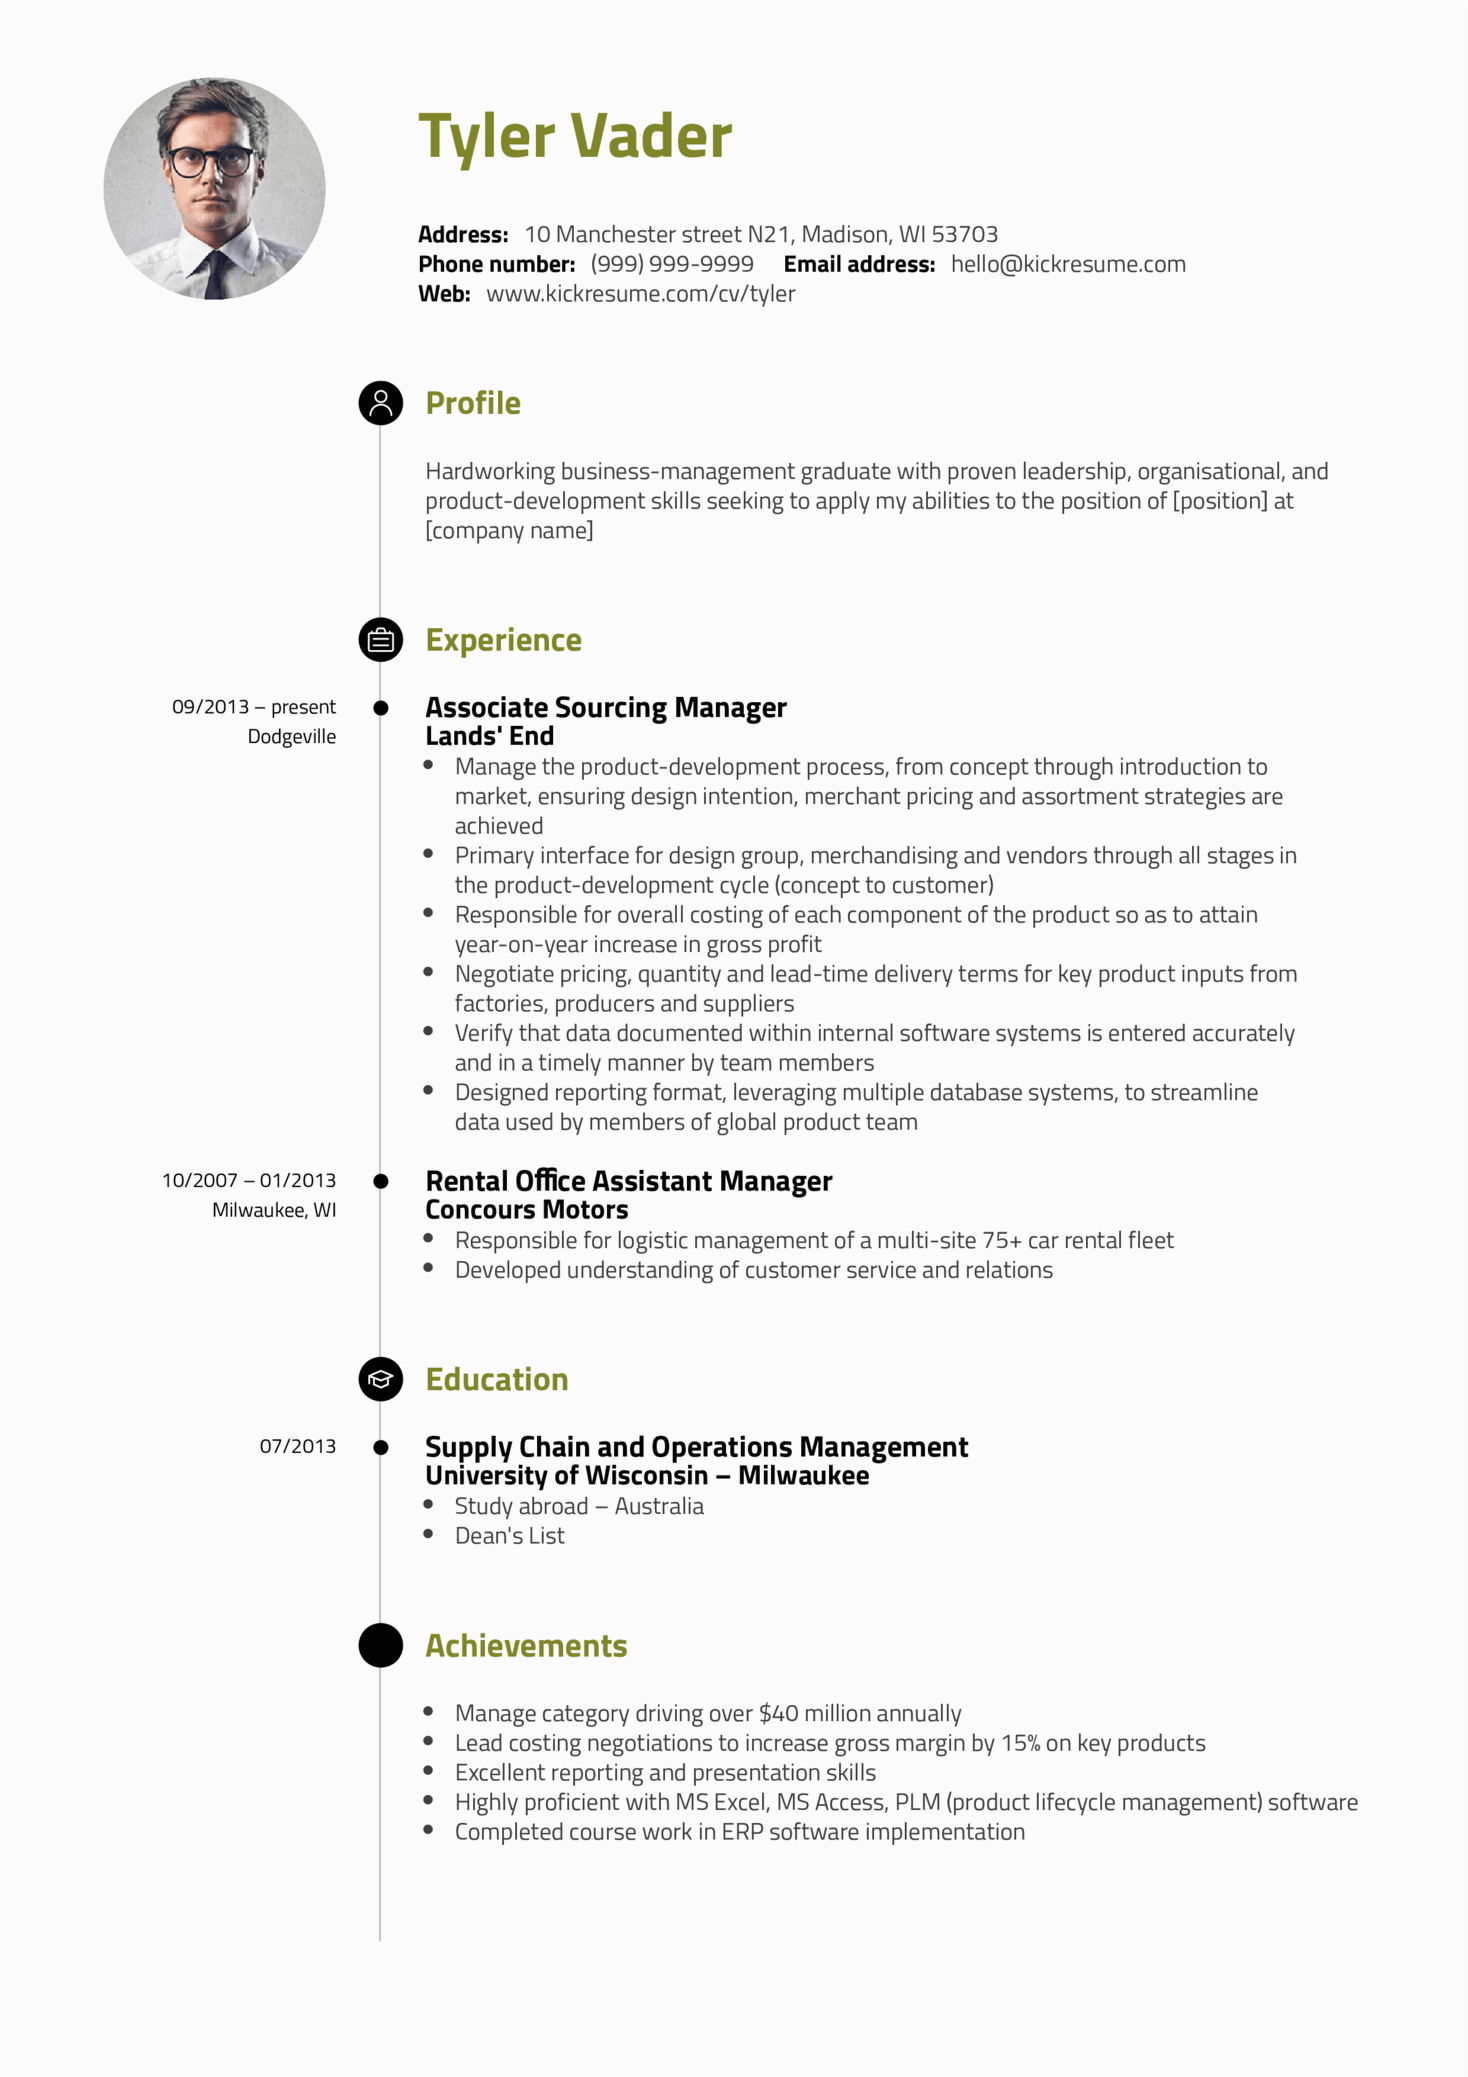 Sample Resume for Business Management Fresh Graduate Resume Examples by Real People Business Management